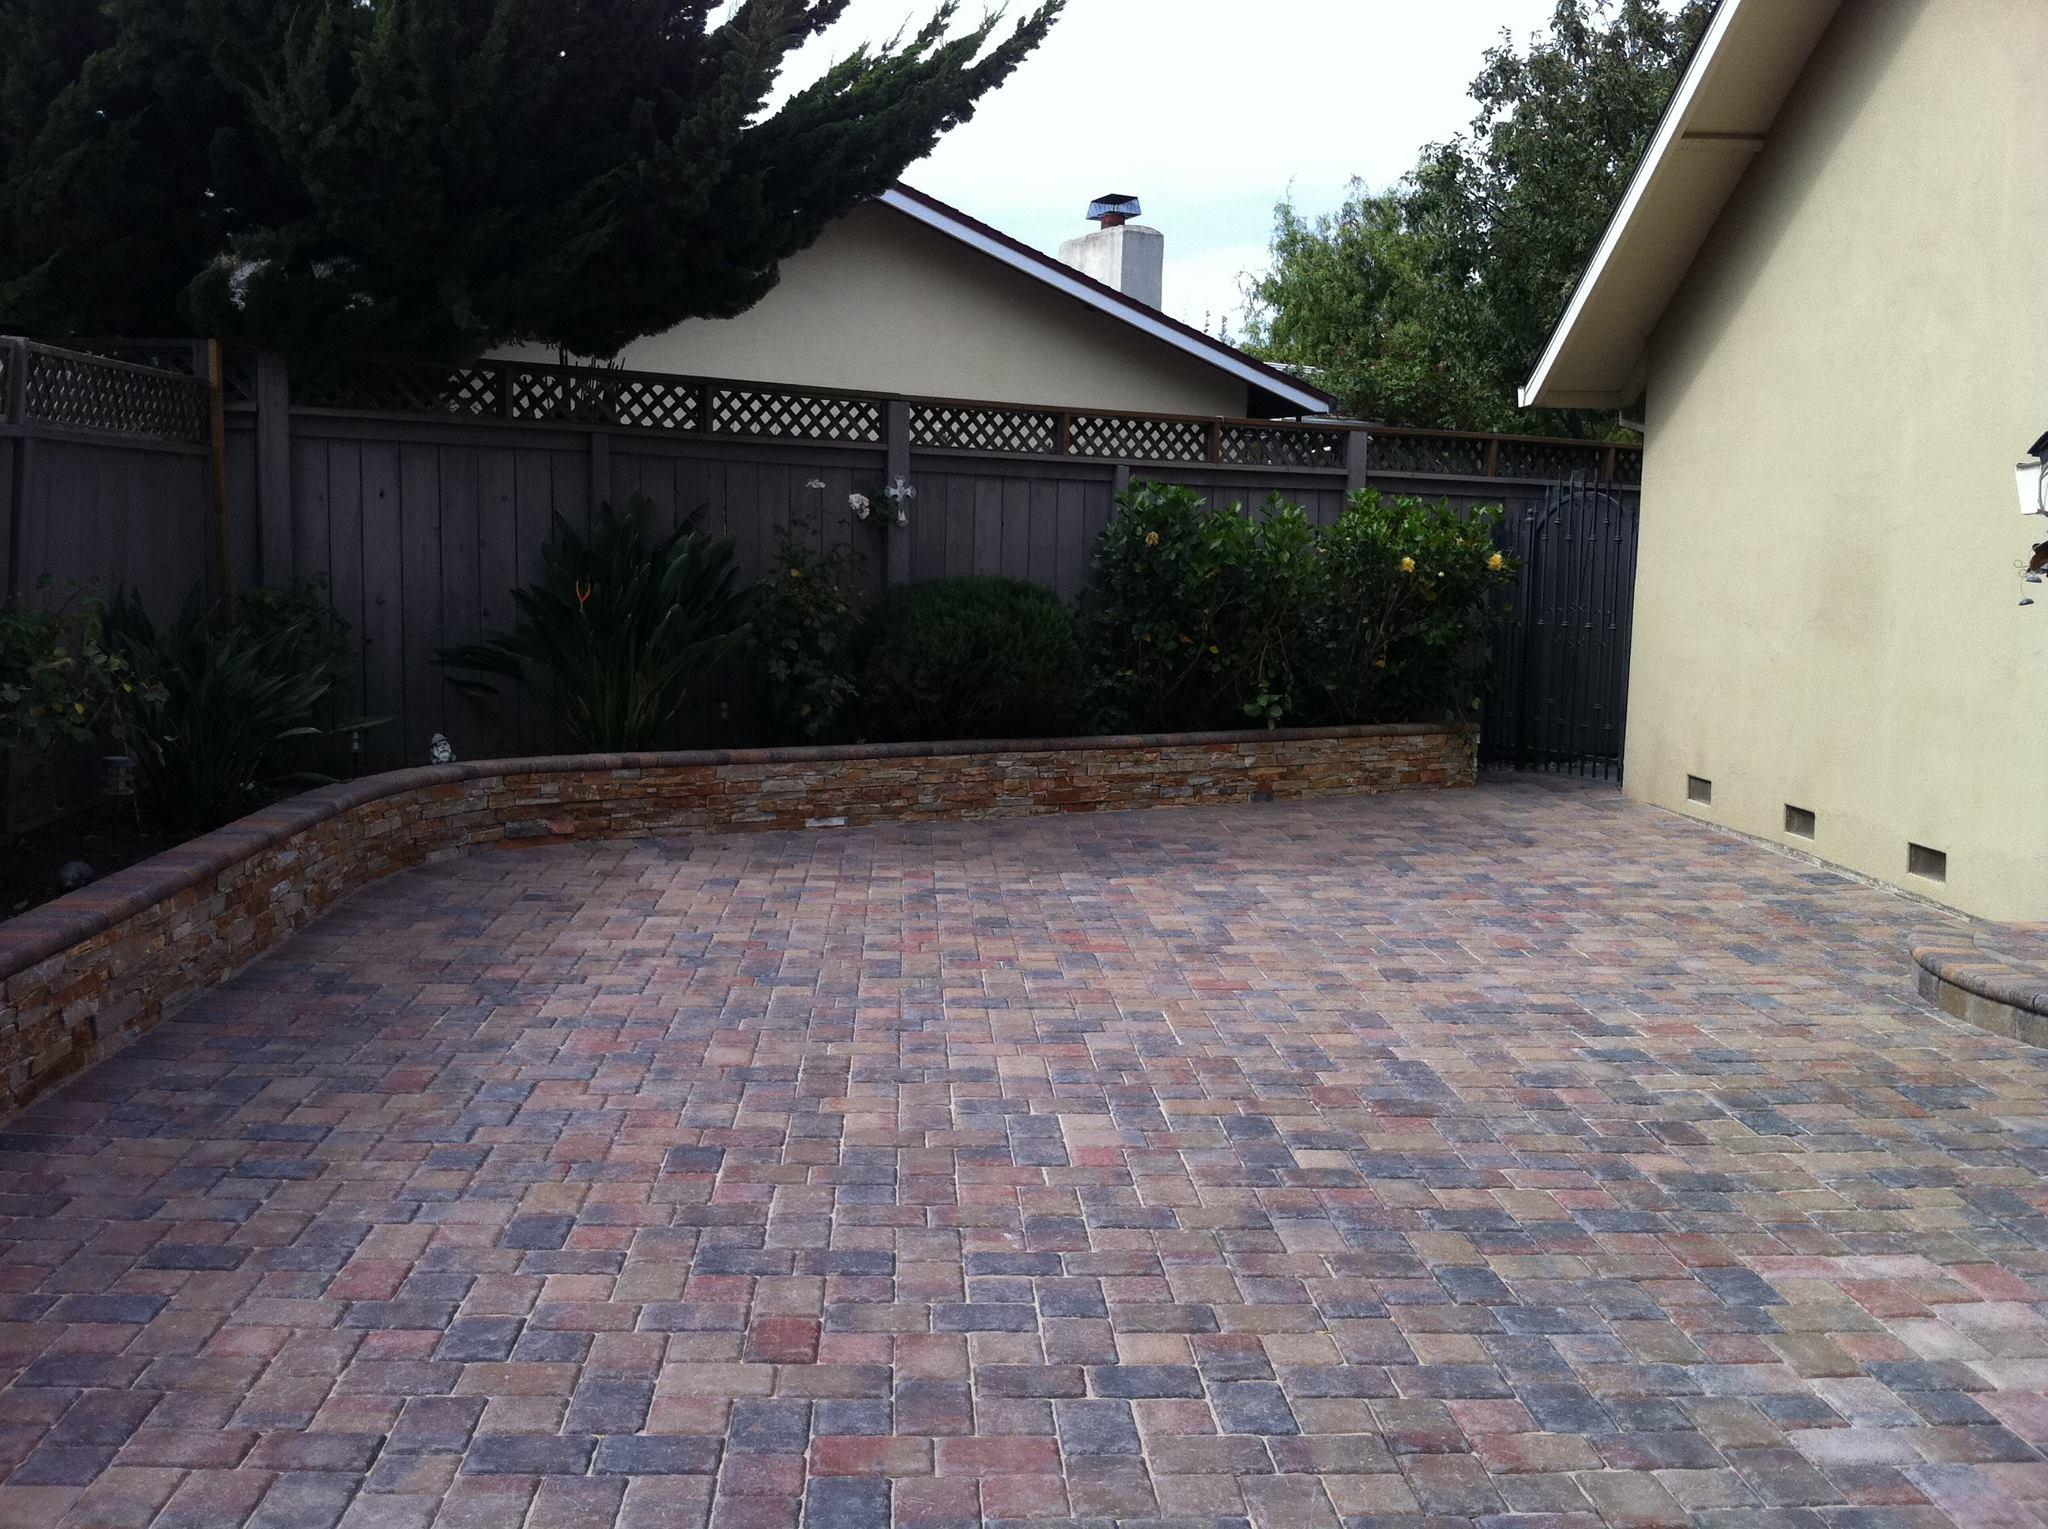 Picture of Mr. Pavers Contractor Services Inc. - Mr. Pavers Contractor Services, Inc.